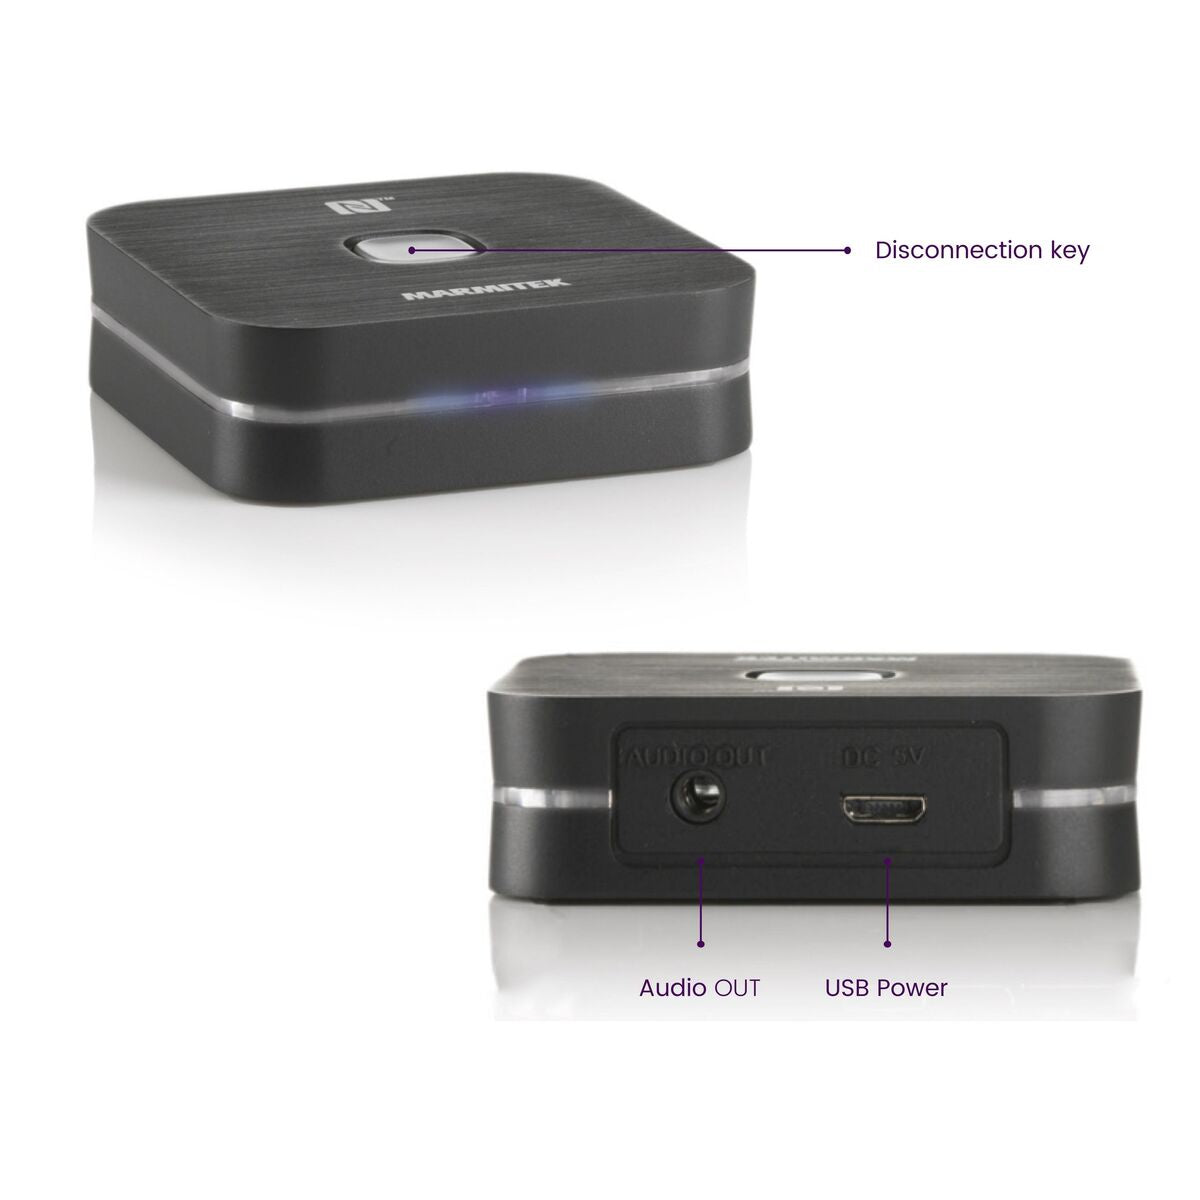 Buying a BoomBoom 80 Bluetooth receiver?